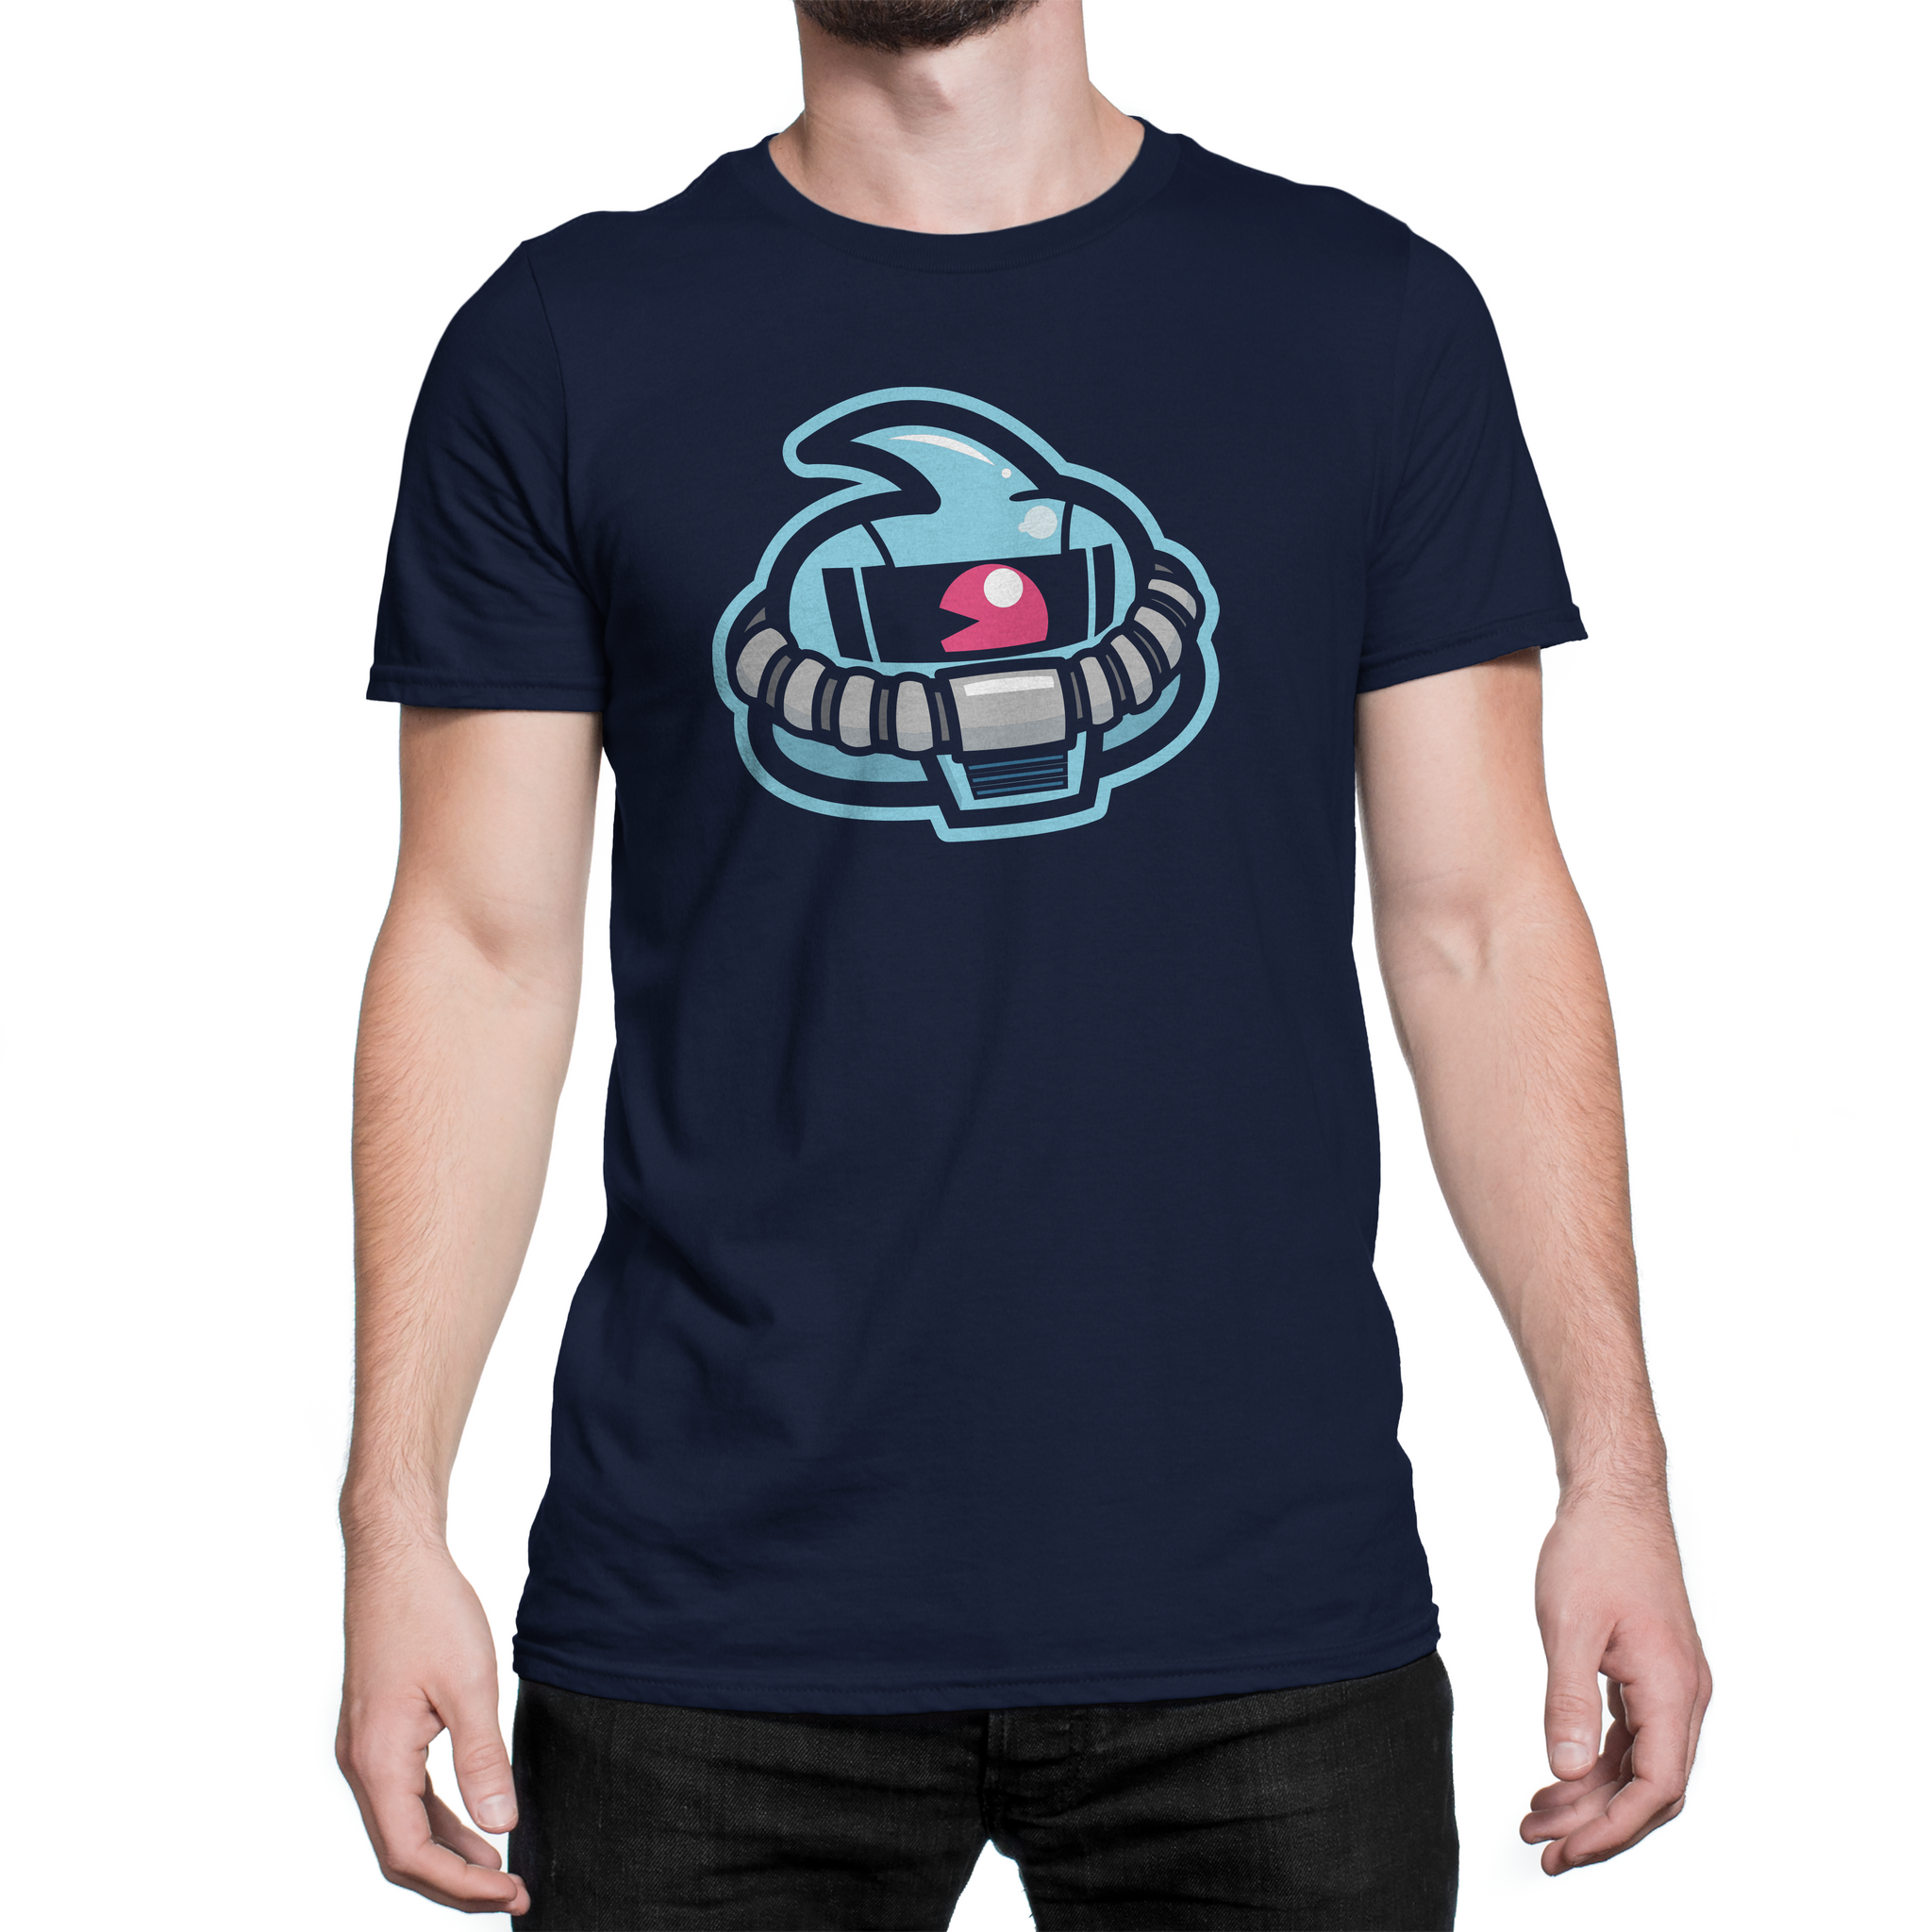 Gouf Poo Andre T-Shirt